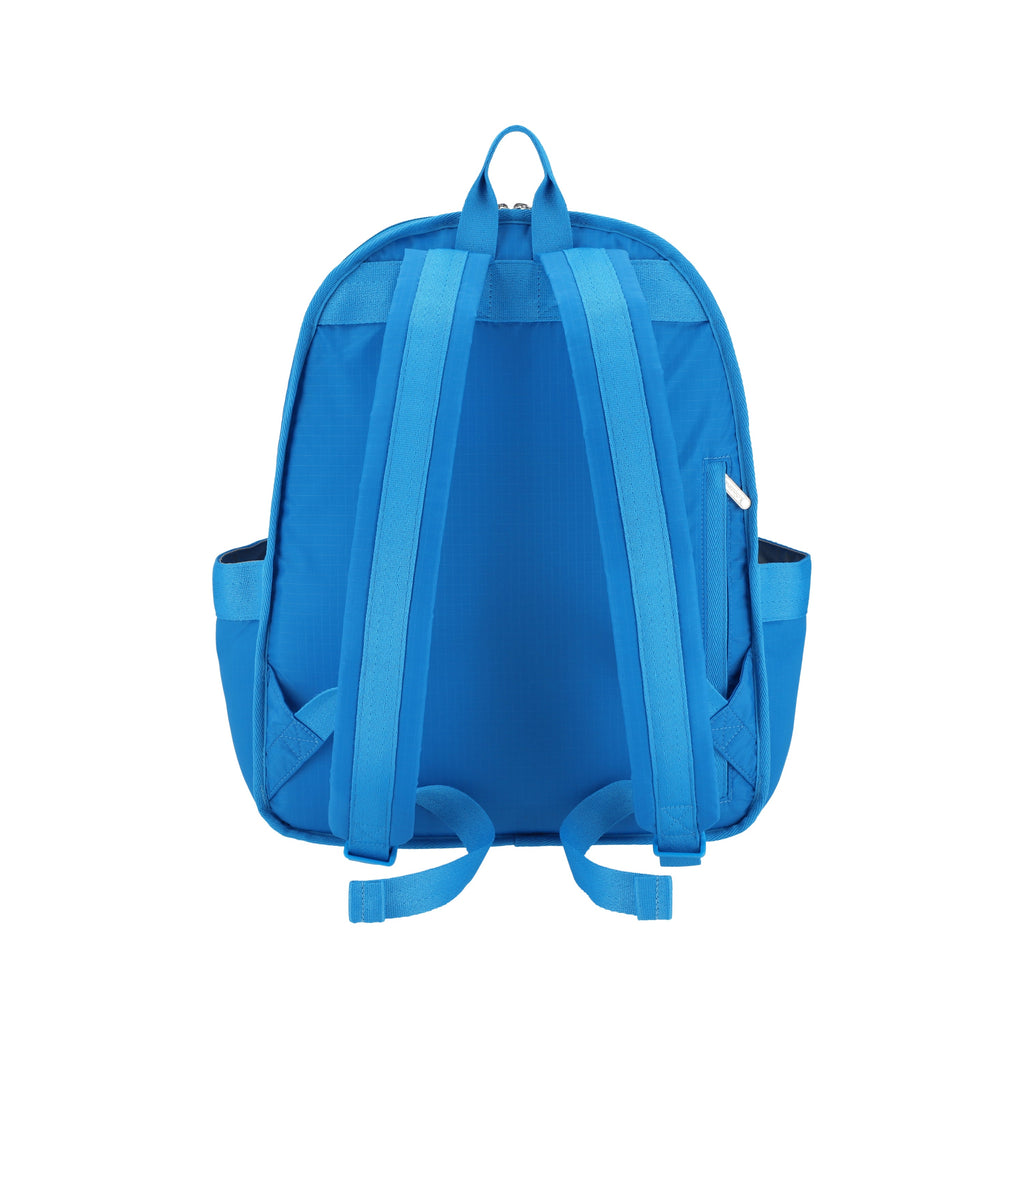 Route Backpack - Ultra Blue solid – LeSportsac